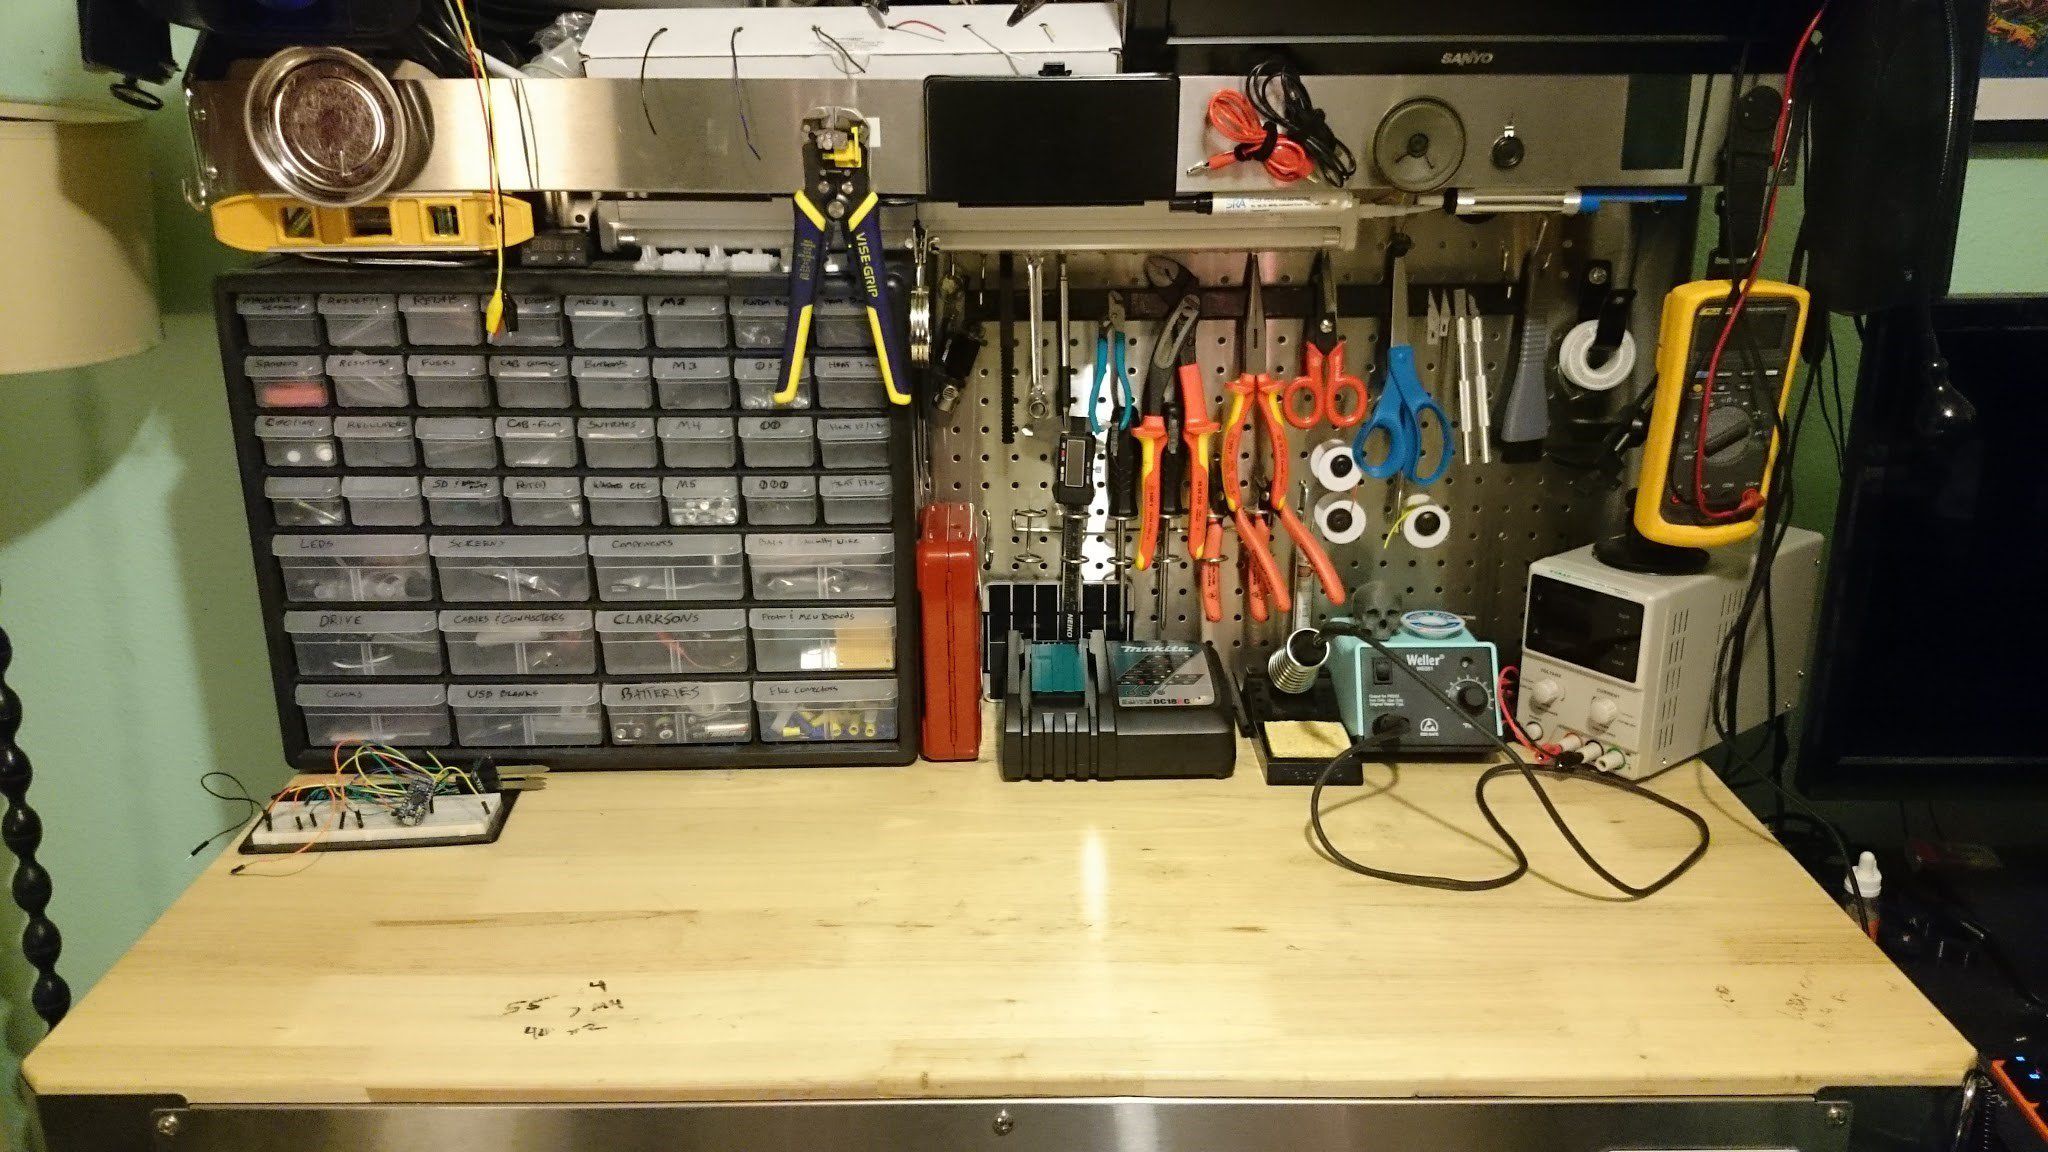 Nail And Screw Storage - Tools & Equipment - Contractor Talk